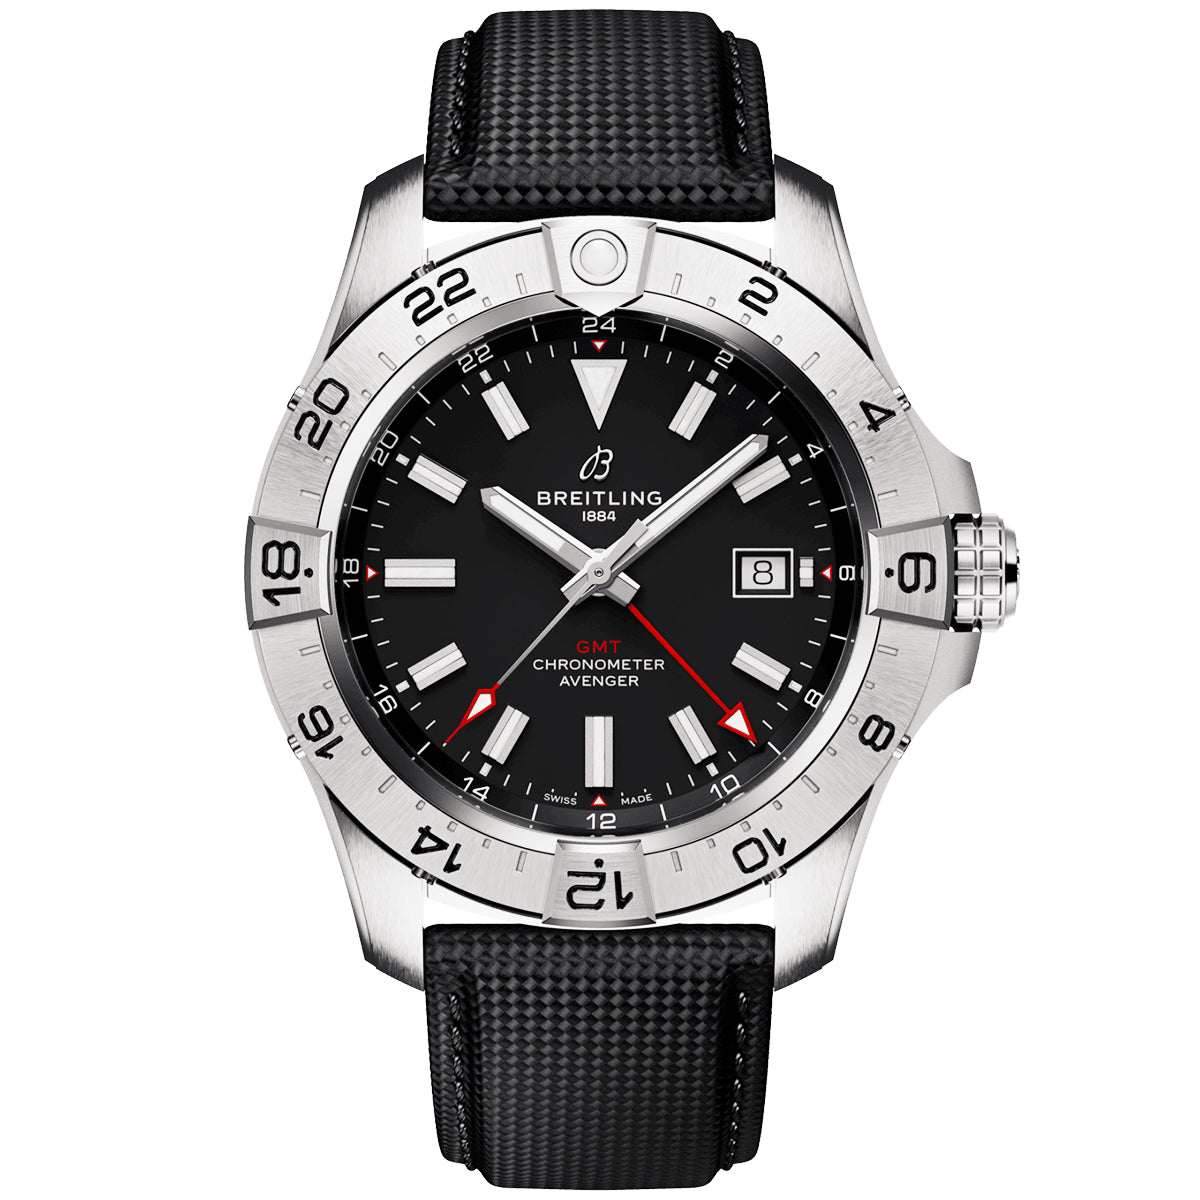 Avenger GMT 44mm Black Dial Automatic Strap Watch